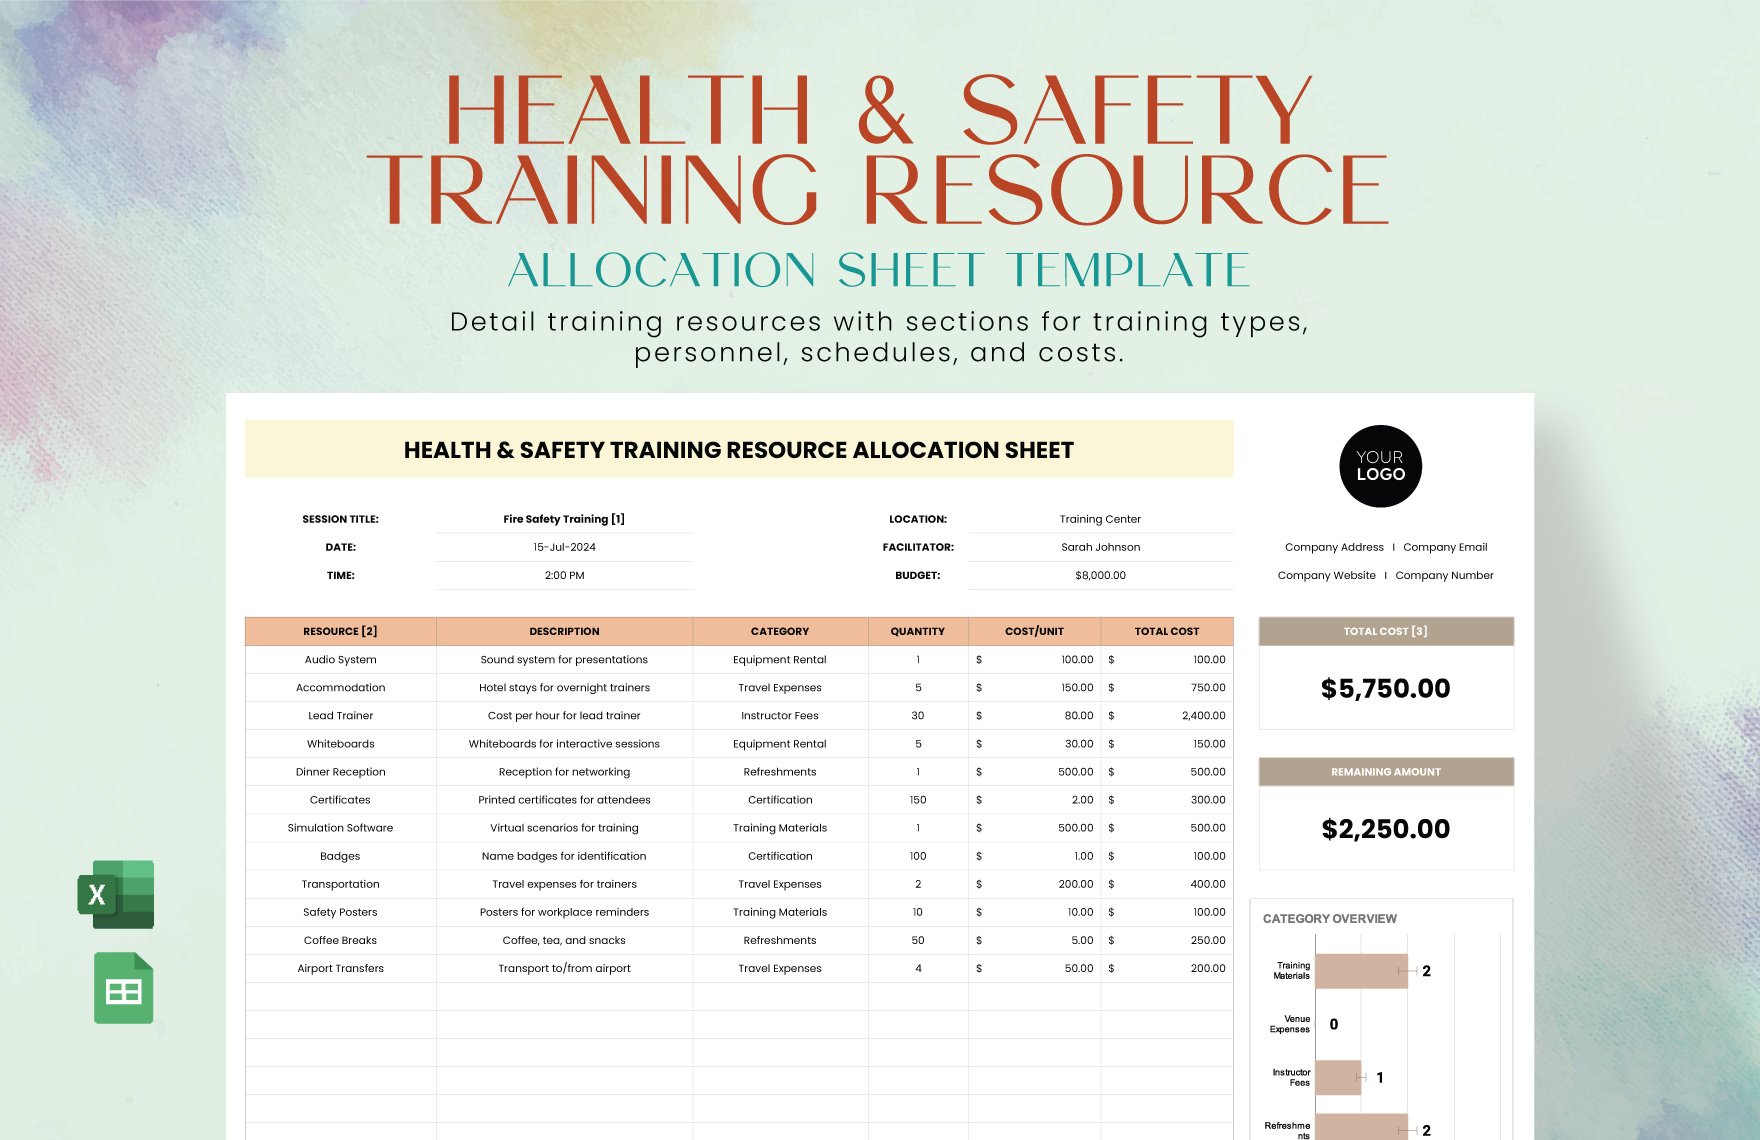 Health & Safety Training Resource Allocation Sheet Template in Excel, Google Sheets